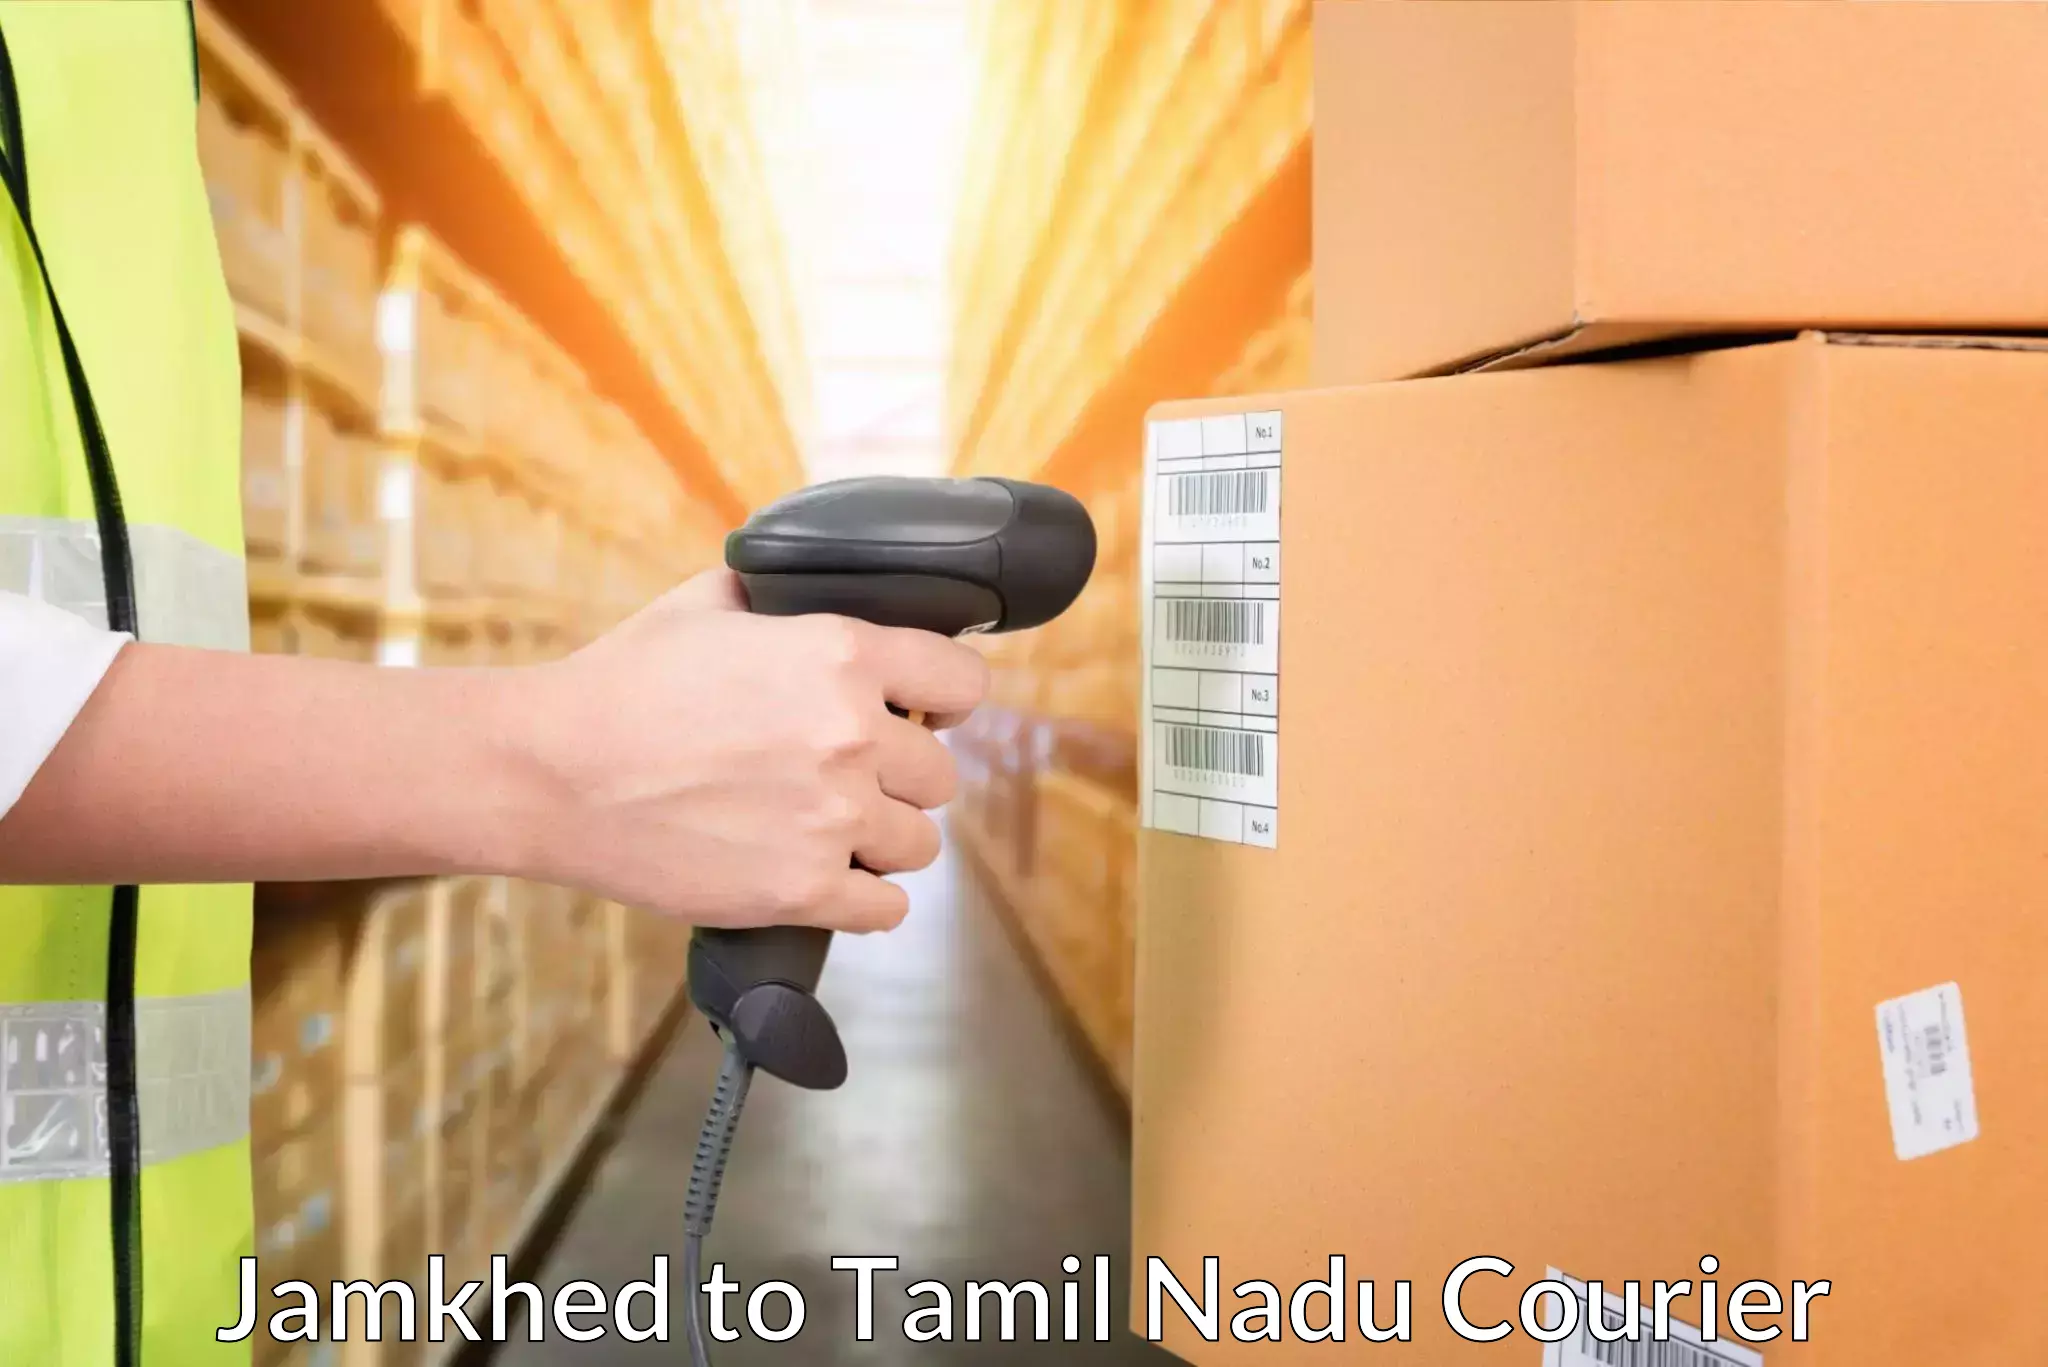 Customer-oriented courier services Jamkhed to Anthiyur